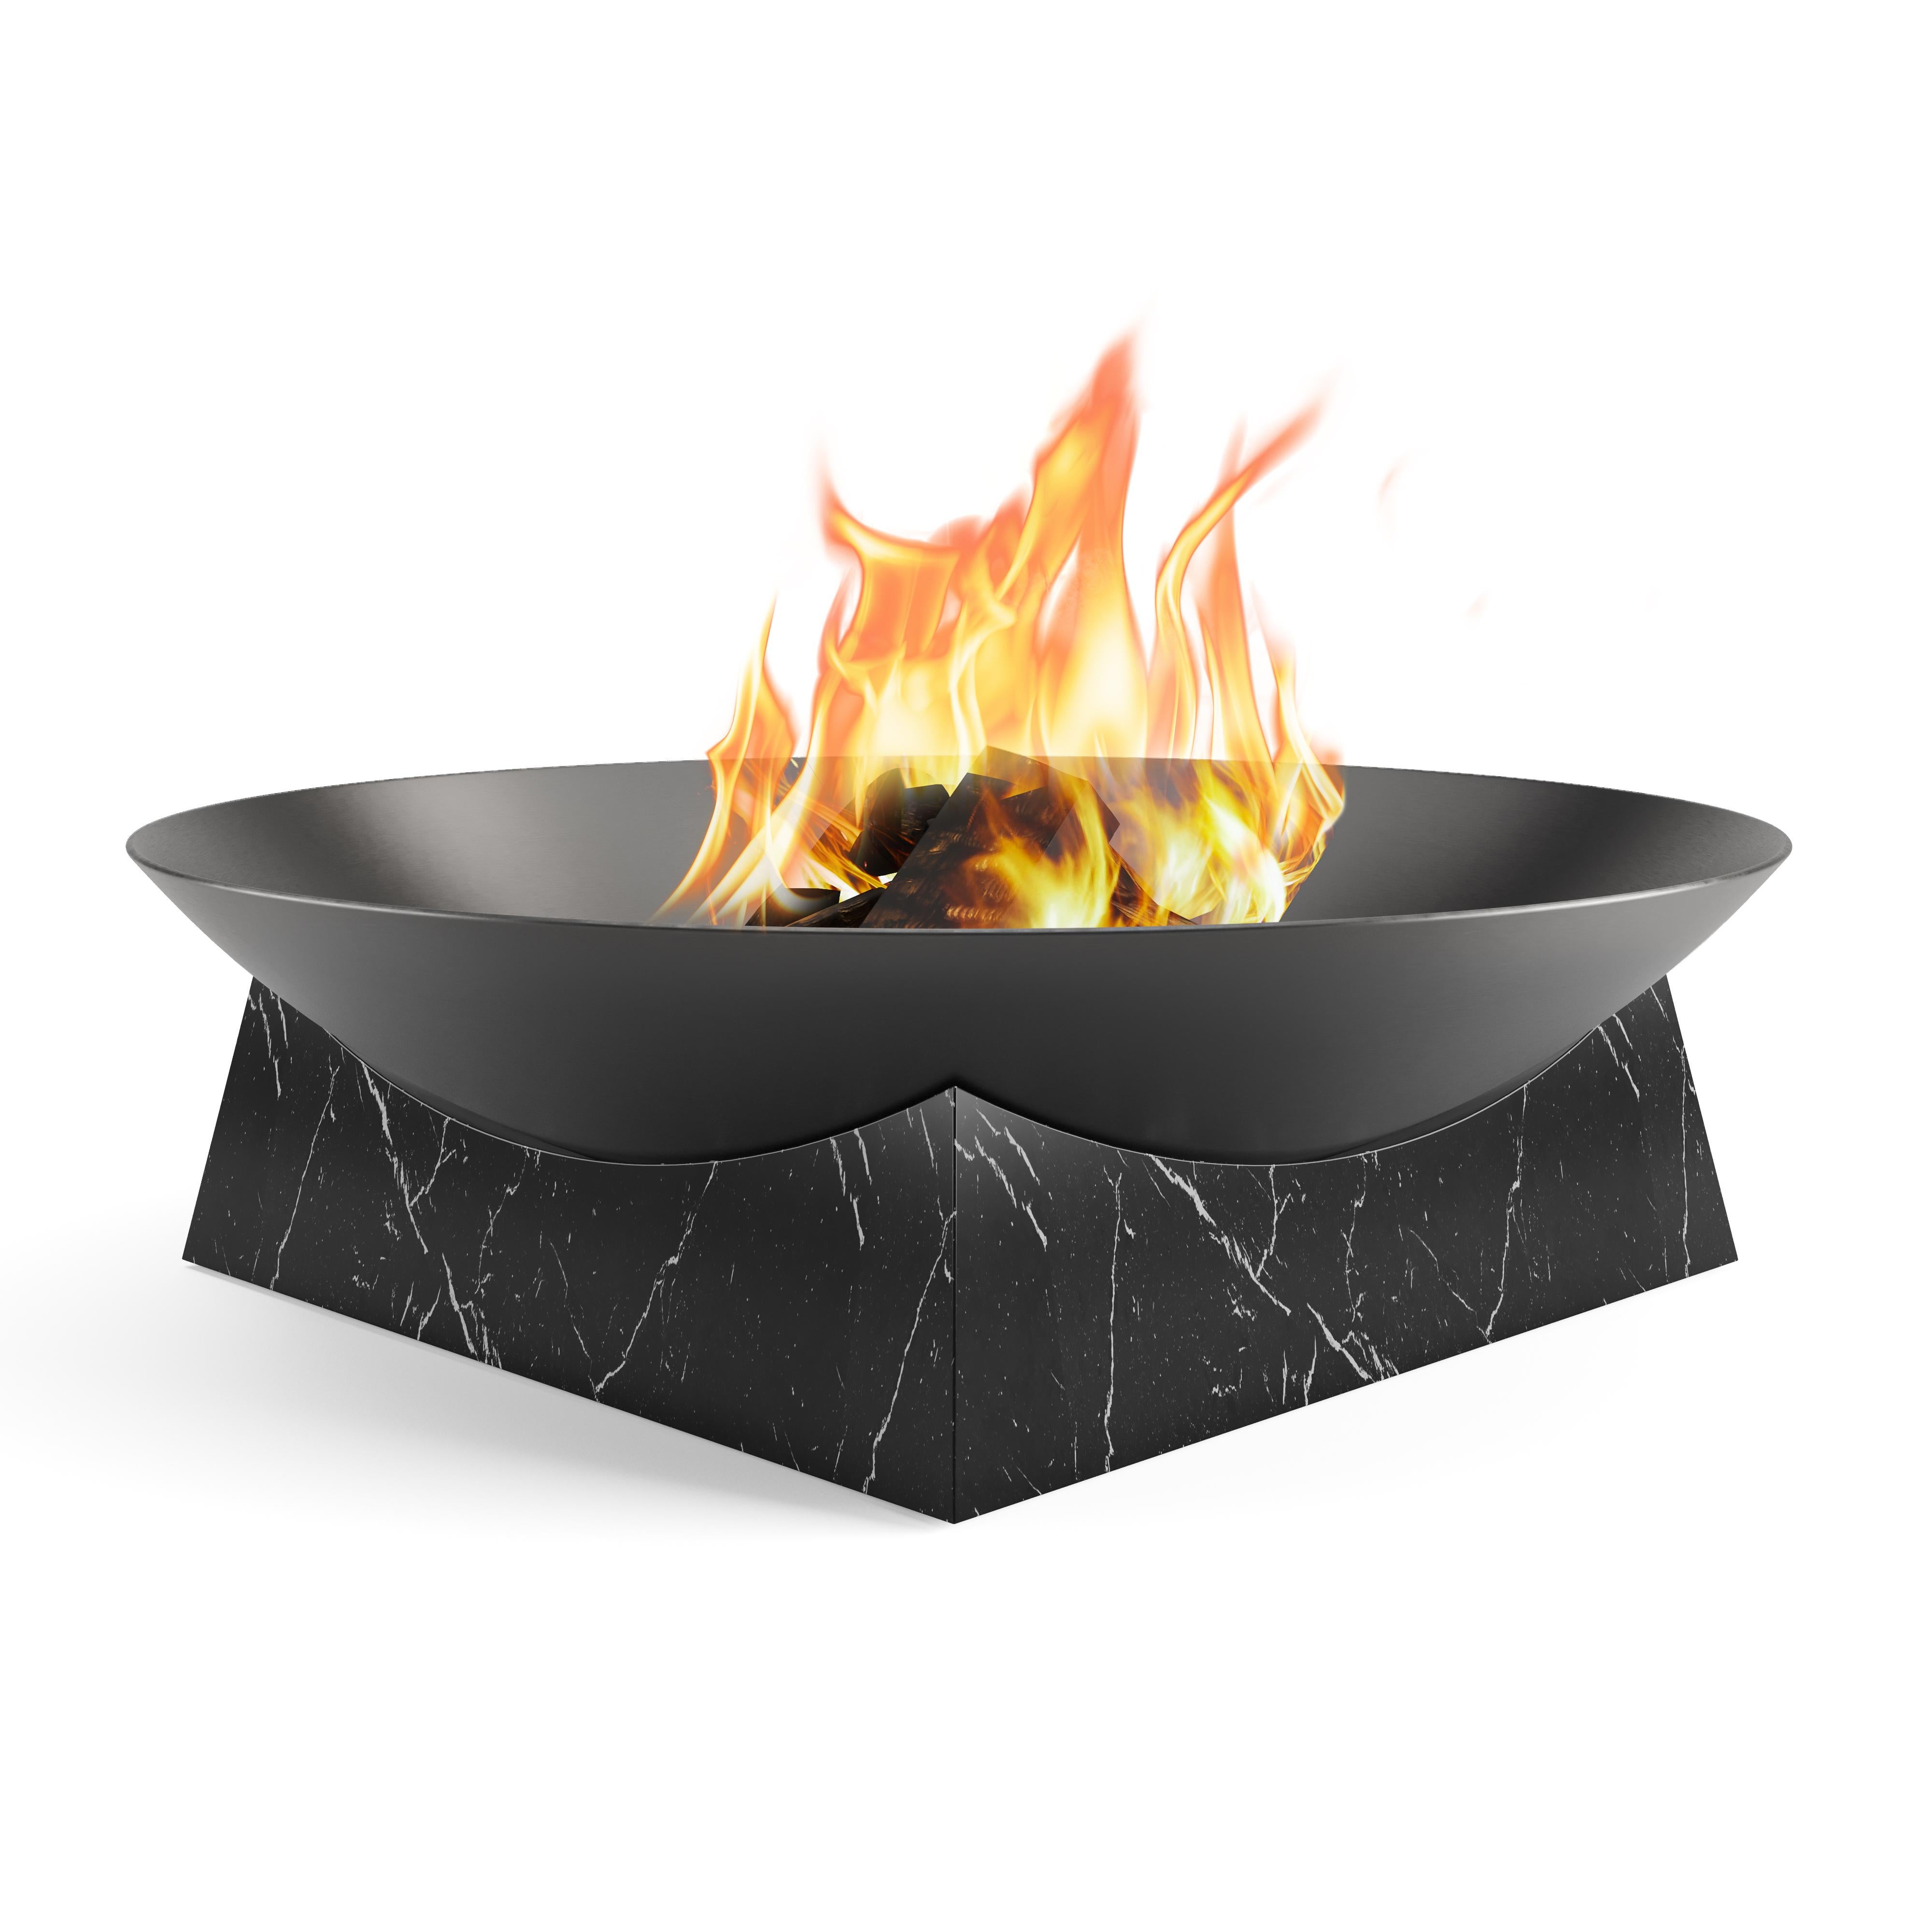 Flama Outdoor Fire Pit

The ultimate complement to warm up your outdoor areas and bring them coziness during the colder days without compromising its elegance!

The whole design of this luxurious outdoor fire pit was developed according to the